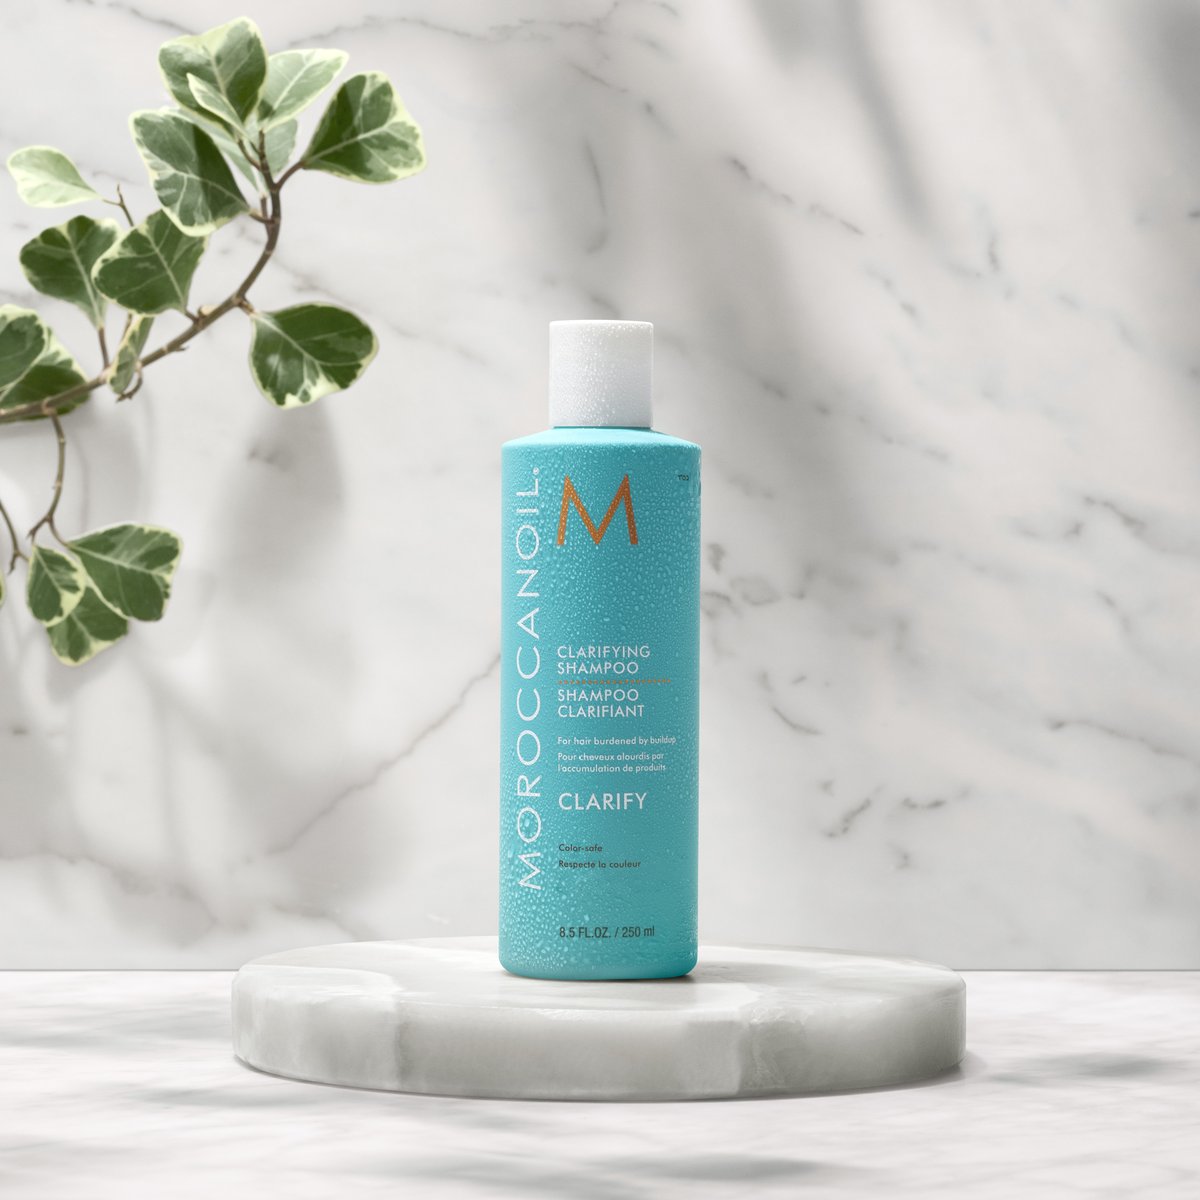 Life’s all about balance. 🧘‍♀️Clarifying Shampoo removes 88% of oil* and everyday buildup without stripping moisture, restoring hair and scalp to a healthy balance.